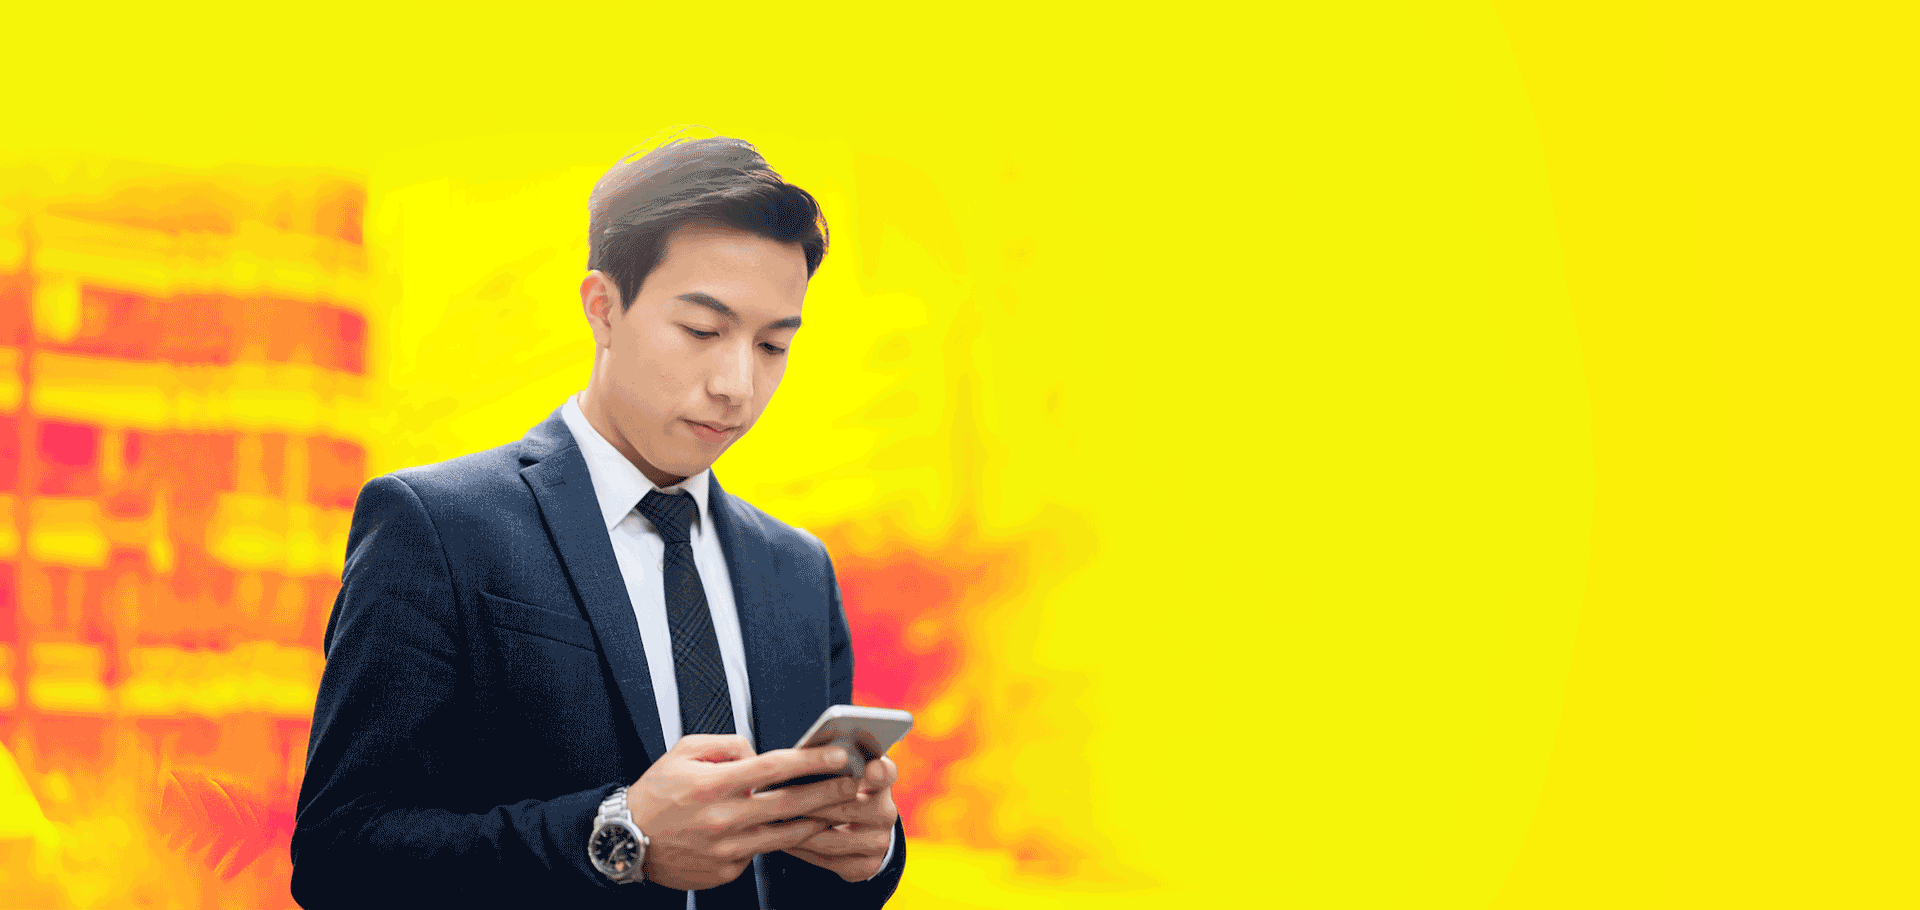 Professional man in suit looking at phone